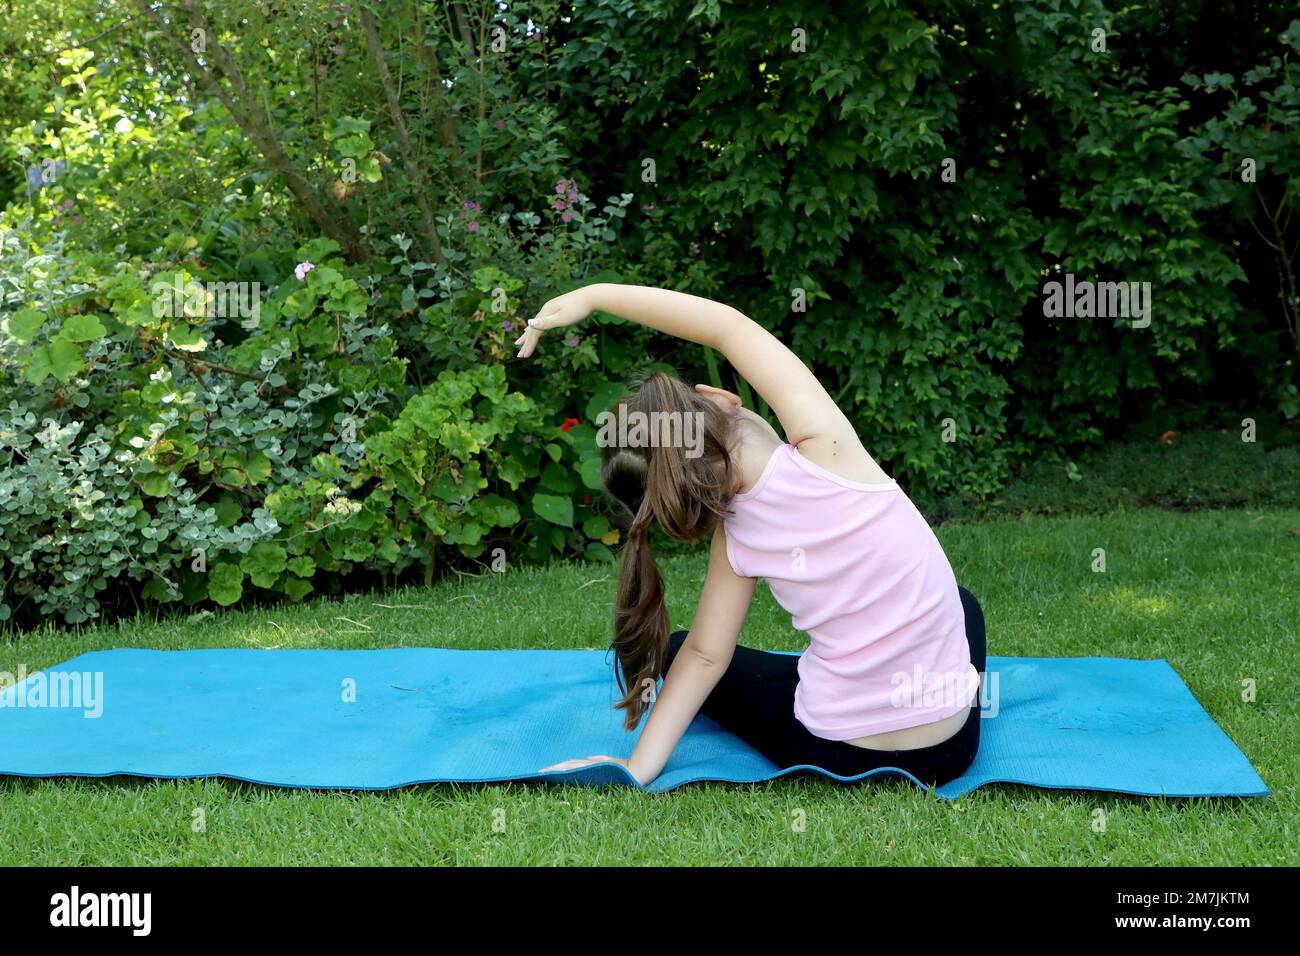 The 10 Most Important Yoga Poses for Beginners | waistshaper